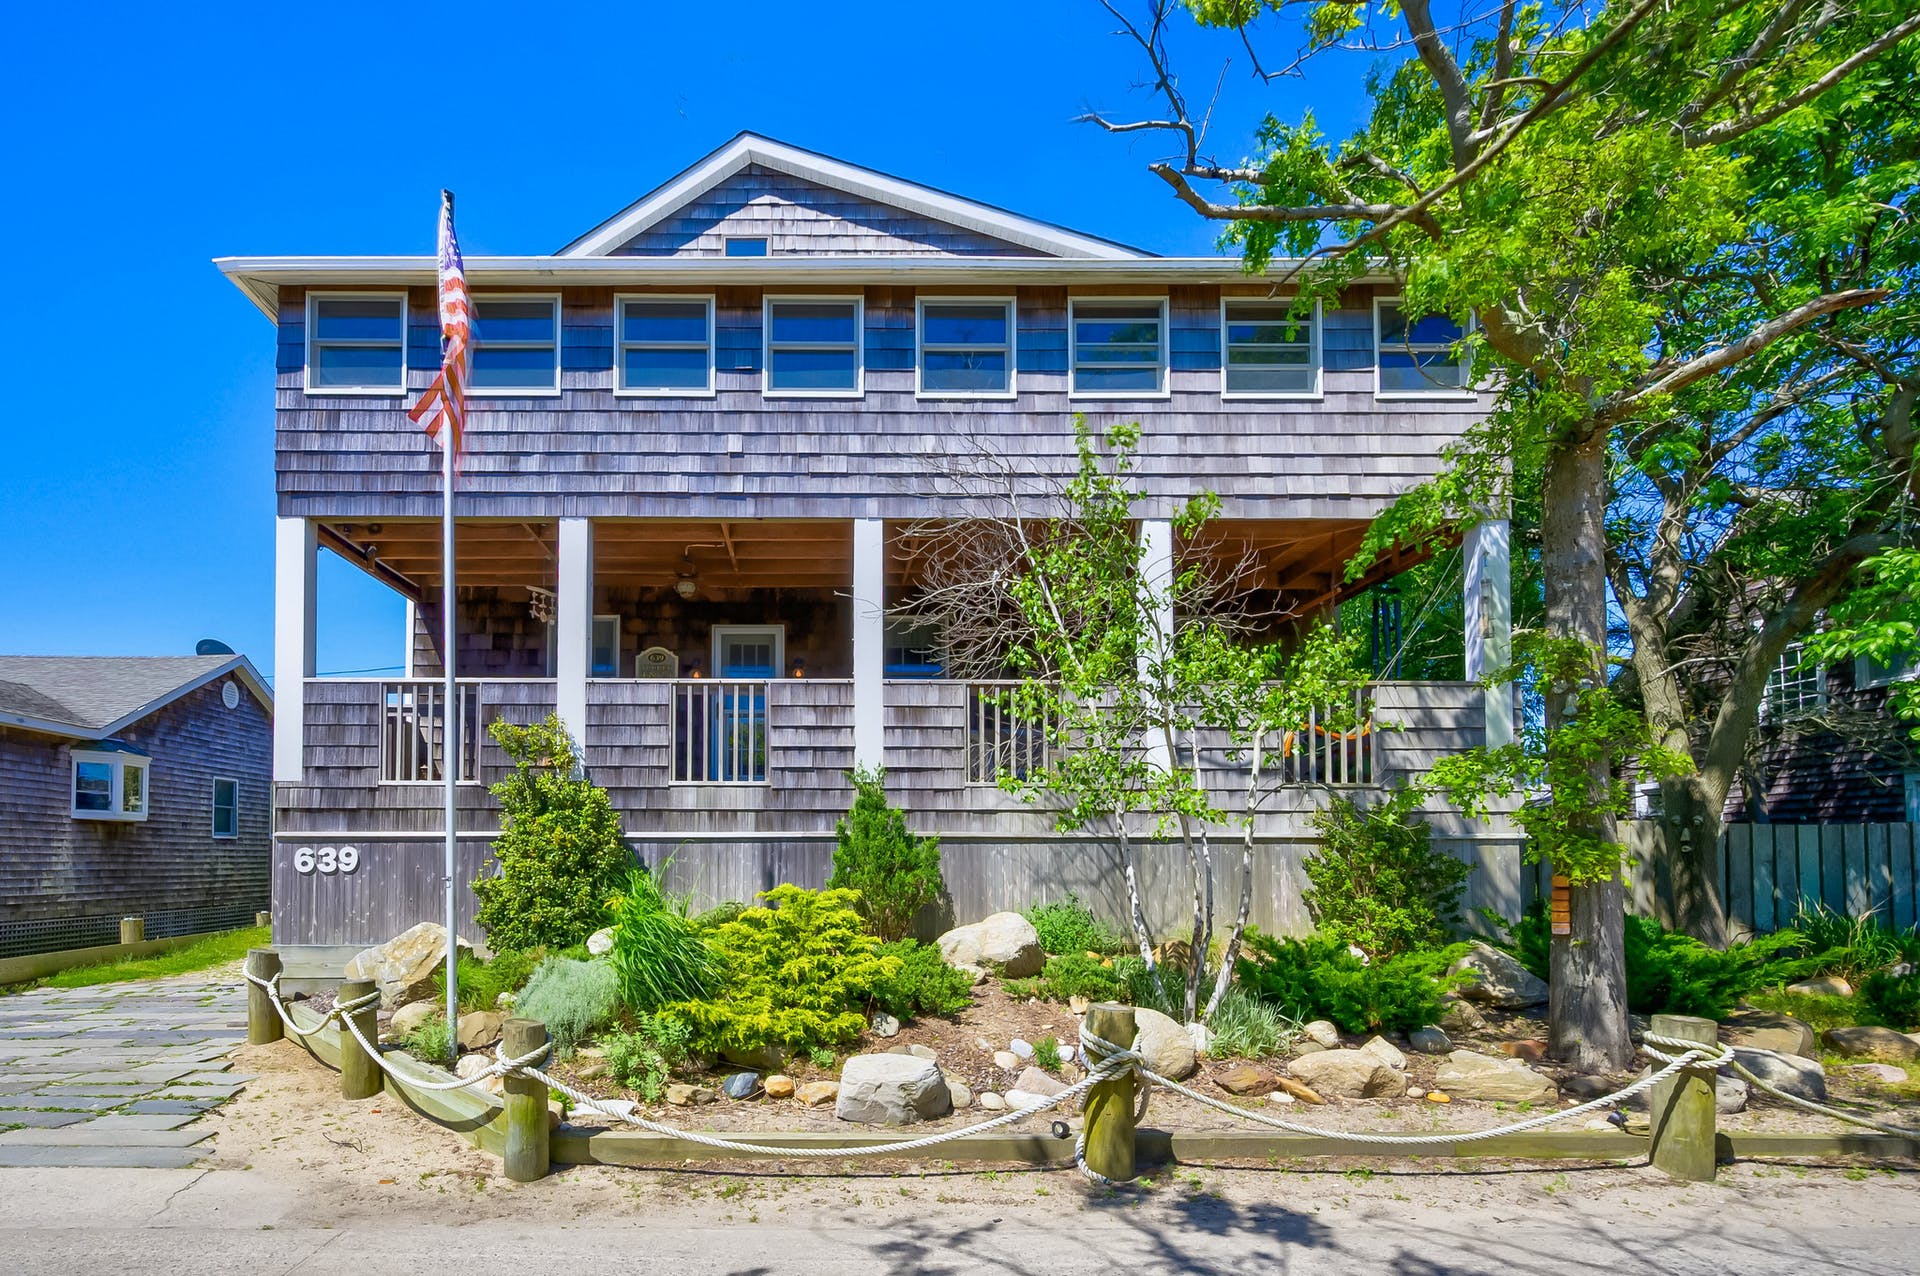 This classic coastal-themed beach home is the only of its kind available to purchase.  It’s ideally located on Ocean Beach, Fire Island - just mere steps from authentic restaurants and boutique shopping and walking distance to the most breathtaking beaches. Enjoy your freshly brewed coffee on the cozy 3-season front porch with peek views of the bay or relax in the oversized 2nd story sunroom. The first floor features hardwood floors, a large living room, updated kitchen with granite countertops and plenty of cabinets, and a meticulously renovated bathroom. Adjacent to the open living area, the formal dining room is home to a beautifully handmade coastal-themed dining set and built in cabinets. The second story boasts 4-spacious bedrooms, all with great closet space. Skylights flood the massive master bedroom and ensuite bathroom with an abundance of natural light. The lush, native foliage and fence create a private oasis in your own backyard - perfect for entertaining. Enjoy it as is or potentially add a pool! Keep cozy during the winter months with the wood burning fire place and develop deep connections with fellow year-round Fire Islanders. This is one of few fully winterized homes on Fire Island! If additional storage is needed, this home has plenty of options including the standing garage/storage area and attic. This immaculate sun-drenched colonial home has been occupied and cared for by the homeowner for more than 30 years. This home has been thoughtfully named Tucked Inn, after the 20-foot Narrasketuck sailboat that the owner and his family used to race. Now is your opportunity to become the next homeowner and make everlasting memories here. When you’re not personally enjoying this beach oasis, take advantage of the HUGE investment potential in the luxury vacation rental market. This is one of the few classic Fire Island homes with a lot size large enough to potentially add a pool left on the market and it will not last. All the furniture is included to make your move here seamless and easy. Affordable flood only $650/YR